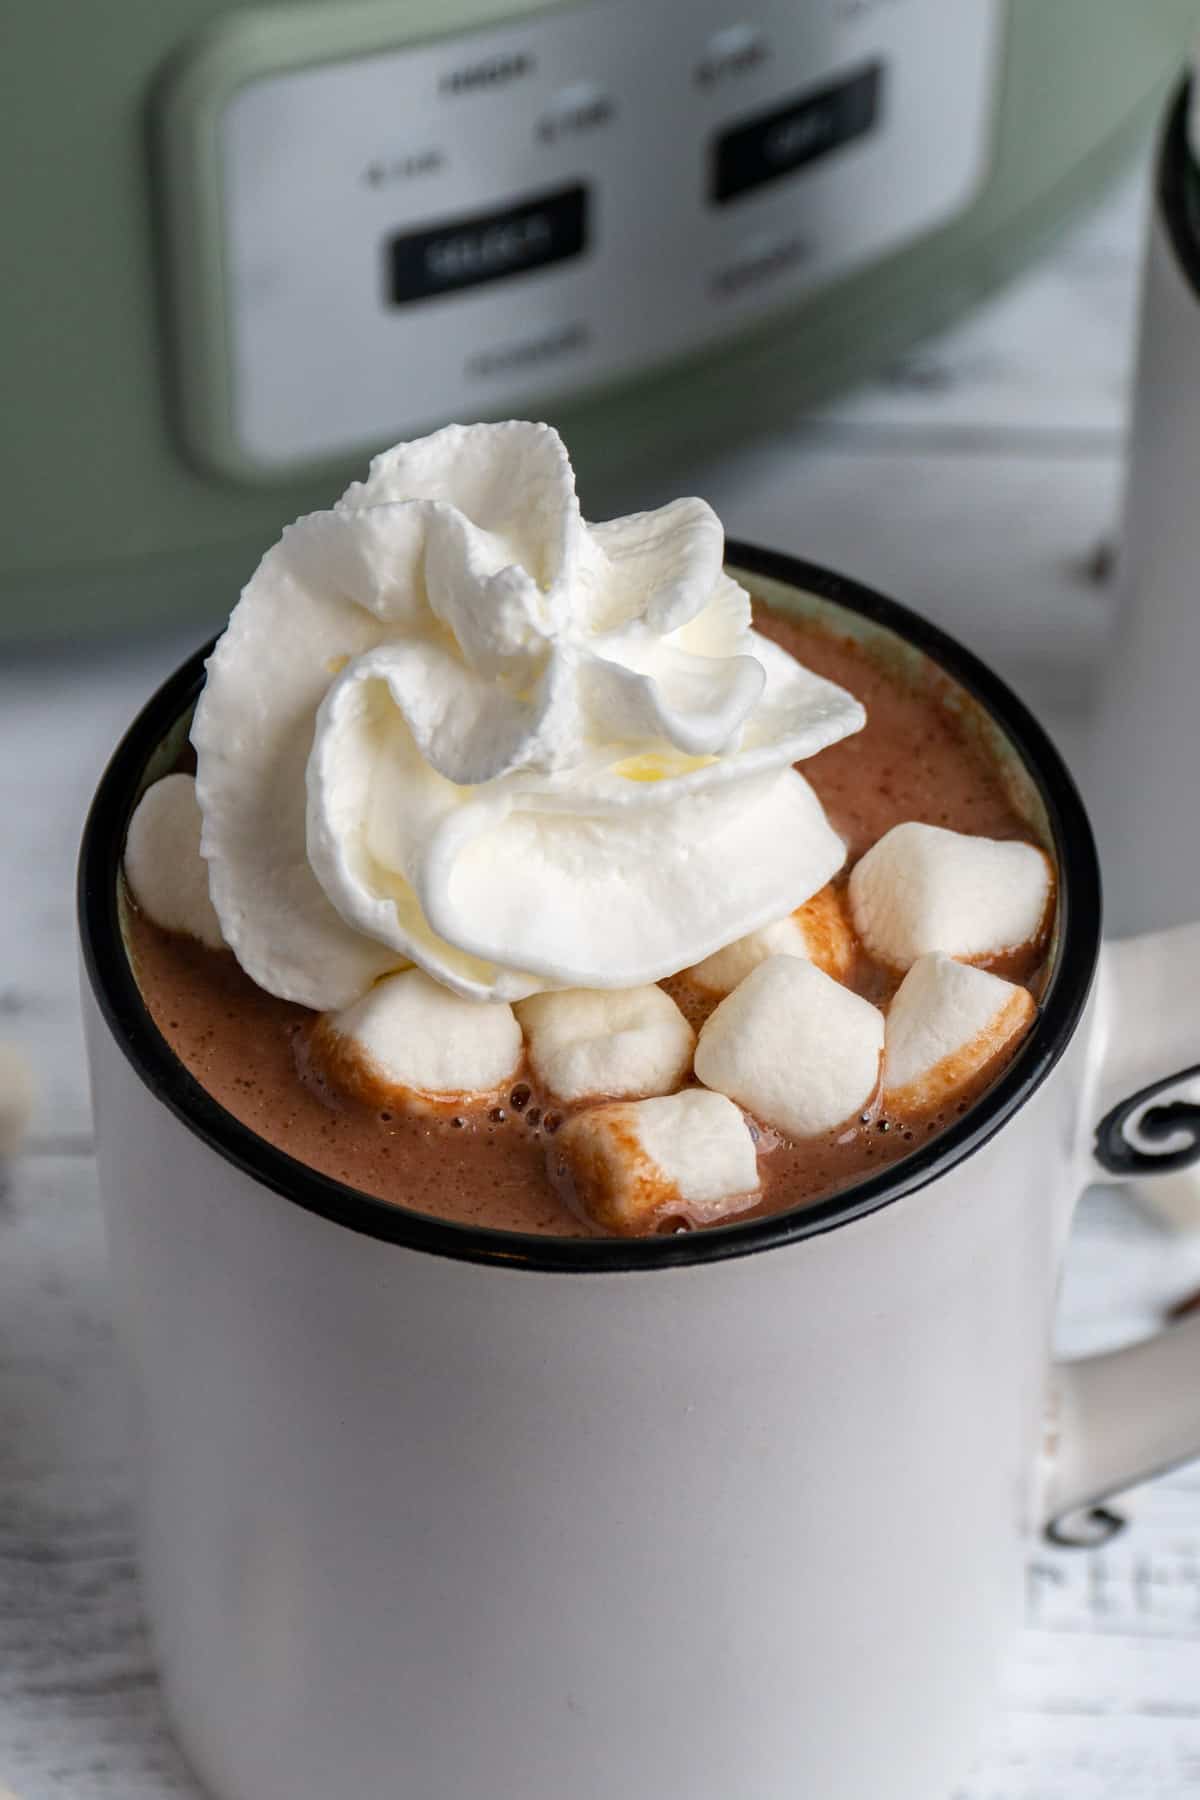 Hot chocolate in a white mug with marshmallows and whip cream on top